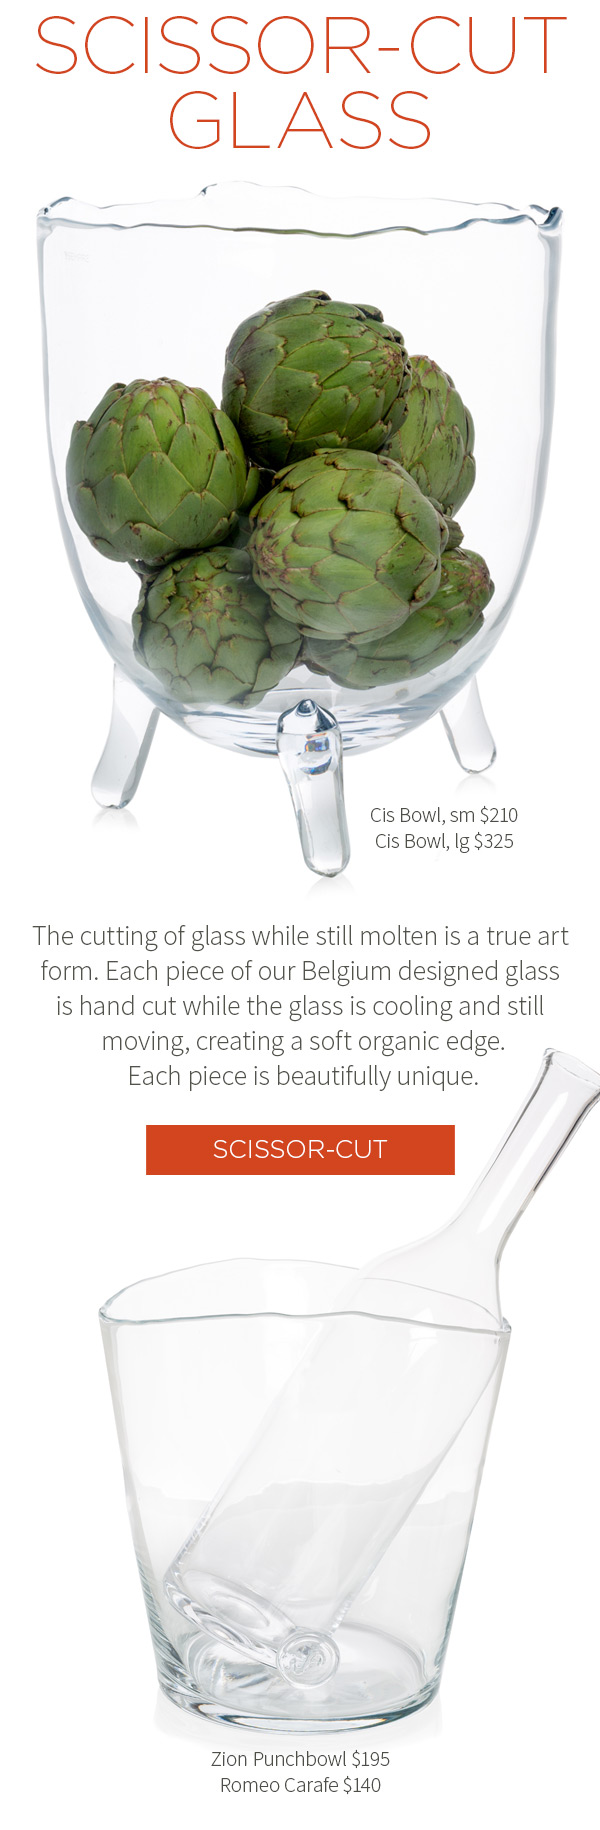 Scissor Cut Glass - The cutting of glass while still molten is a true art form. Each piece of our Belgium designed glass is hand cut while the glass is cooling and still moving, creating a soft organic edge. Each piece is beautifully unique.